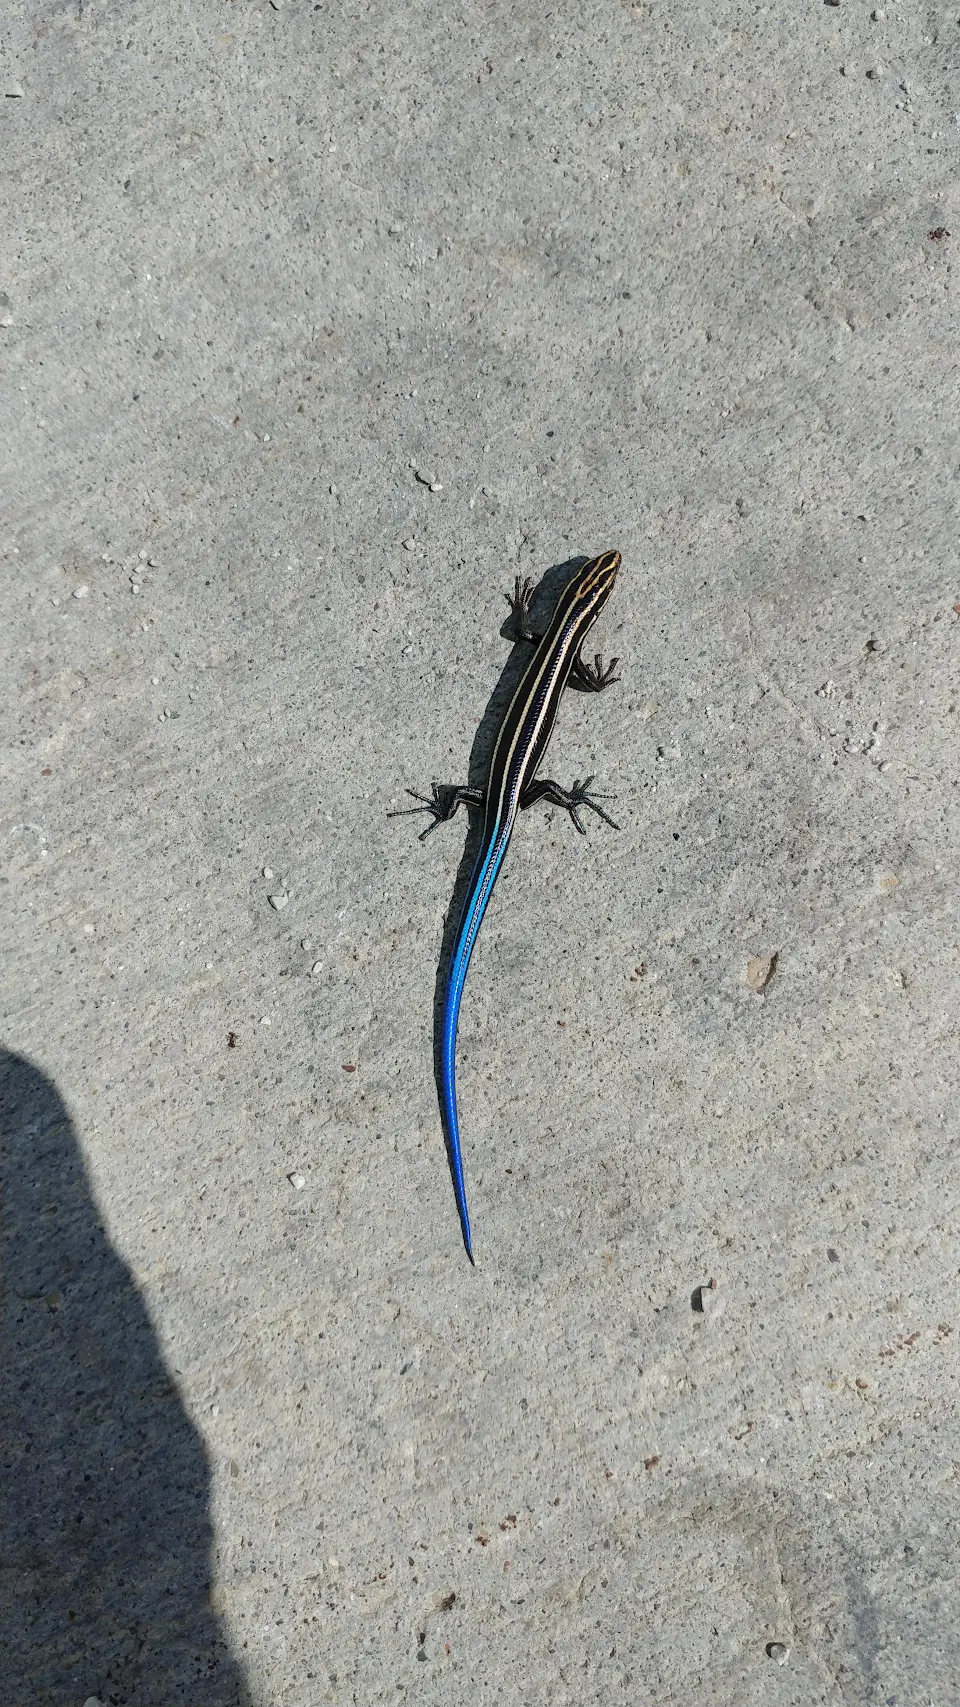 Common 5 line Skink - found at work today in Ohio.